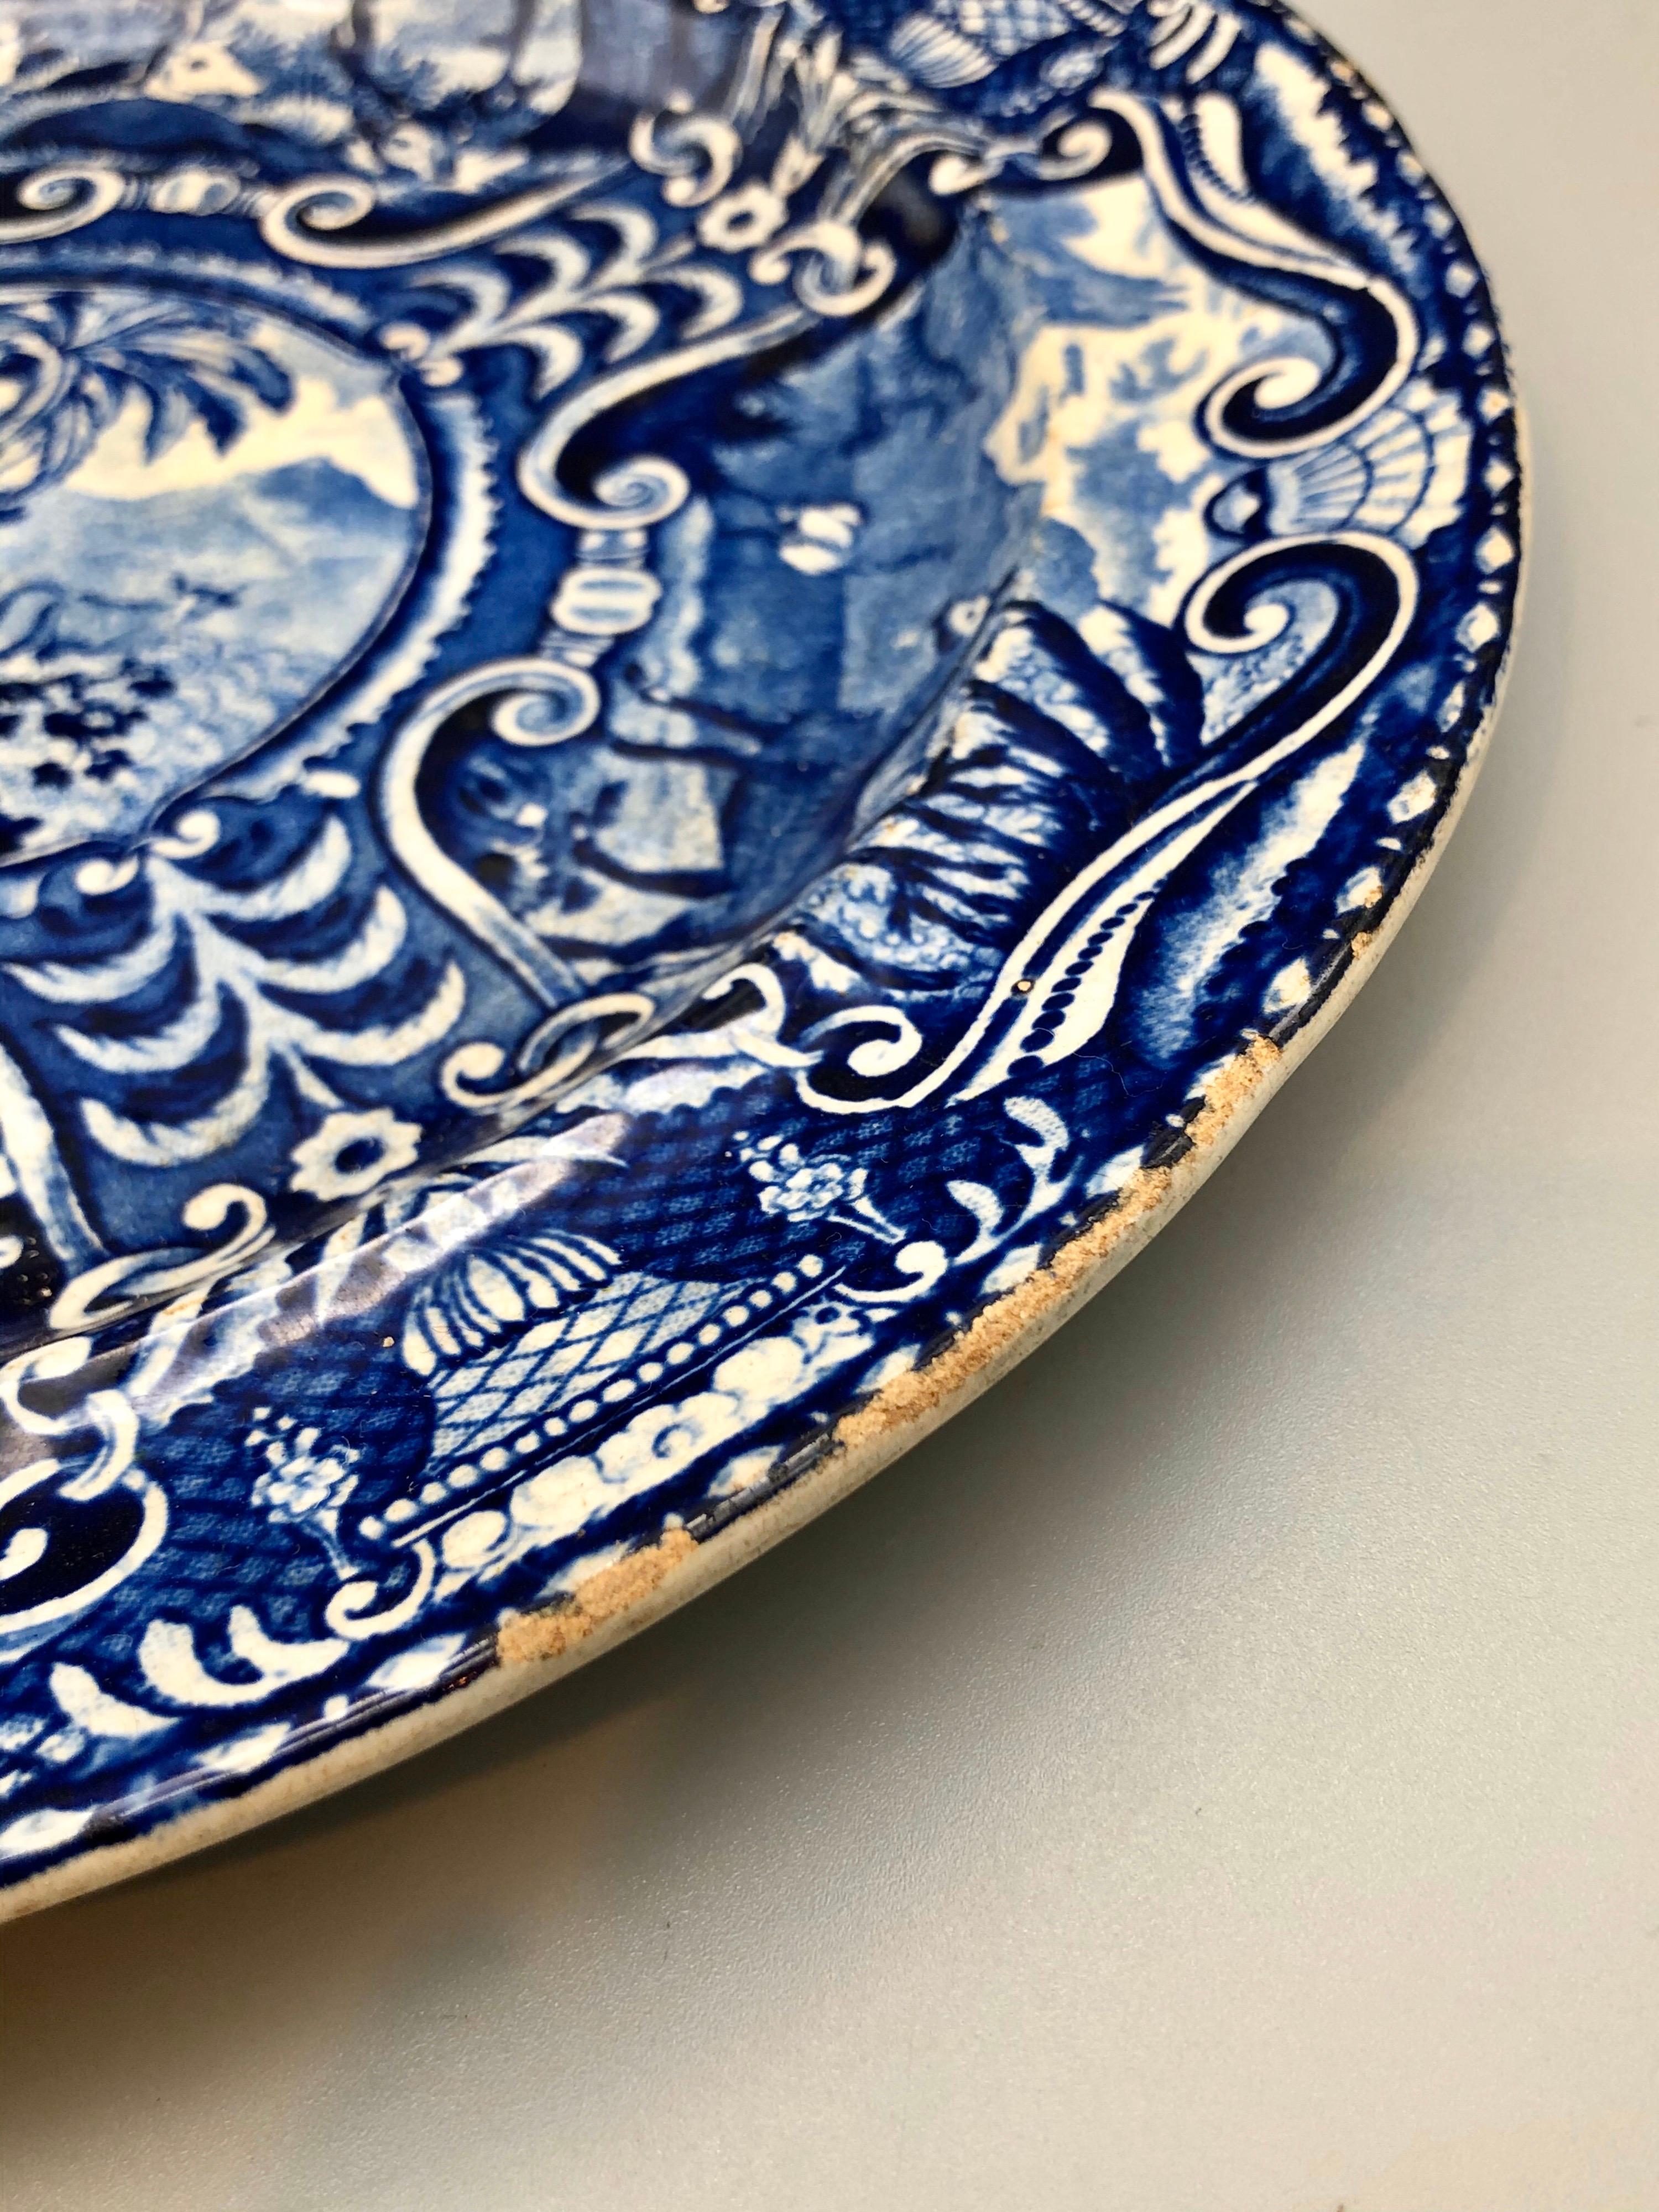 Romantic Early 1800s Quadruped Plate Lion Pattern Cobalt Blue and White For Sale